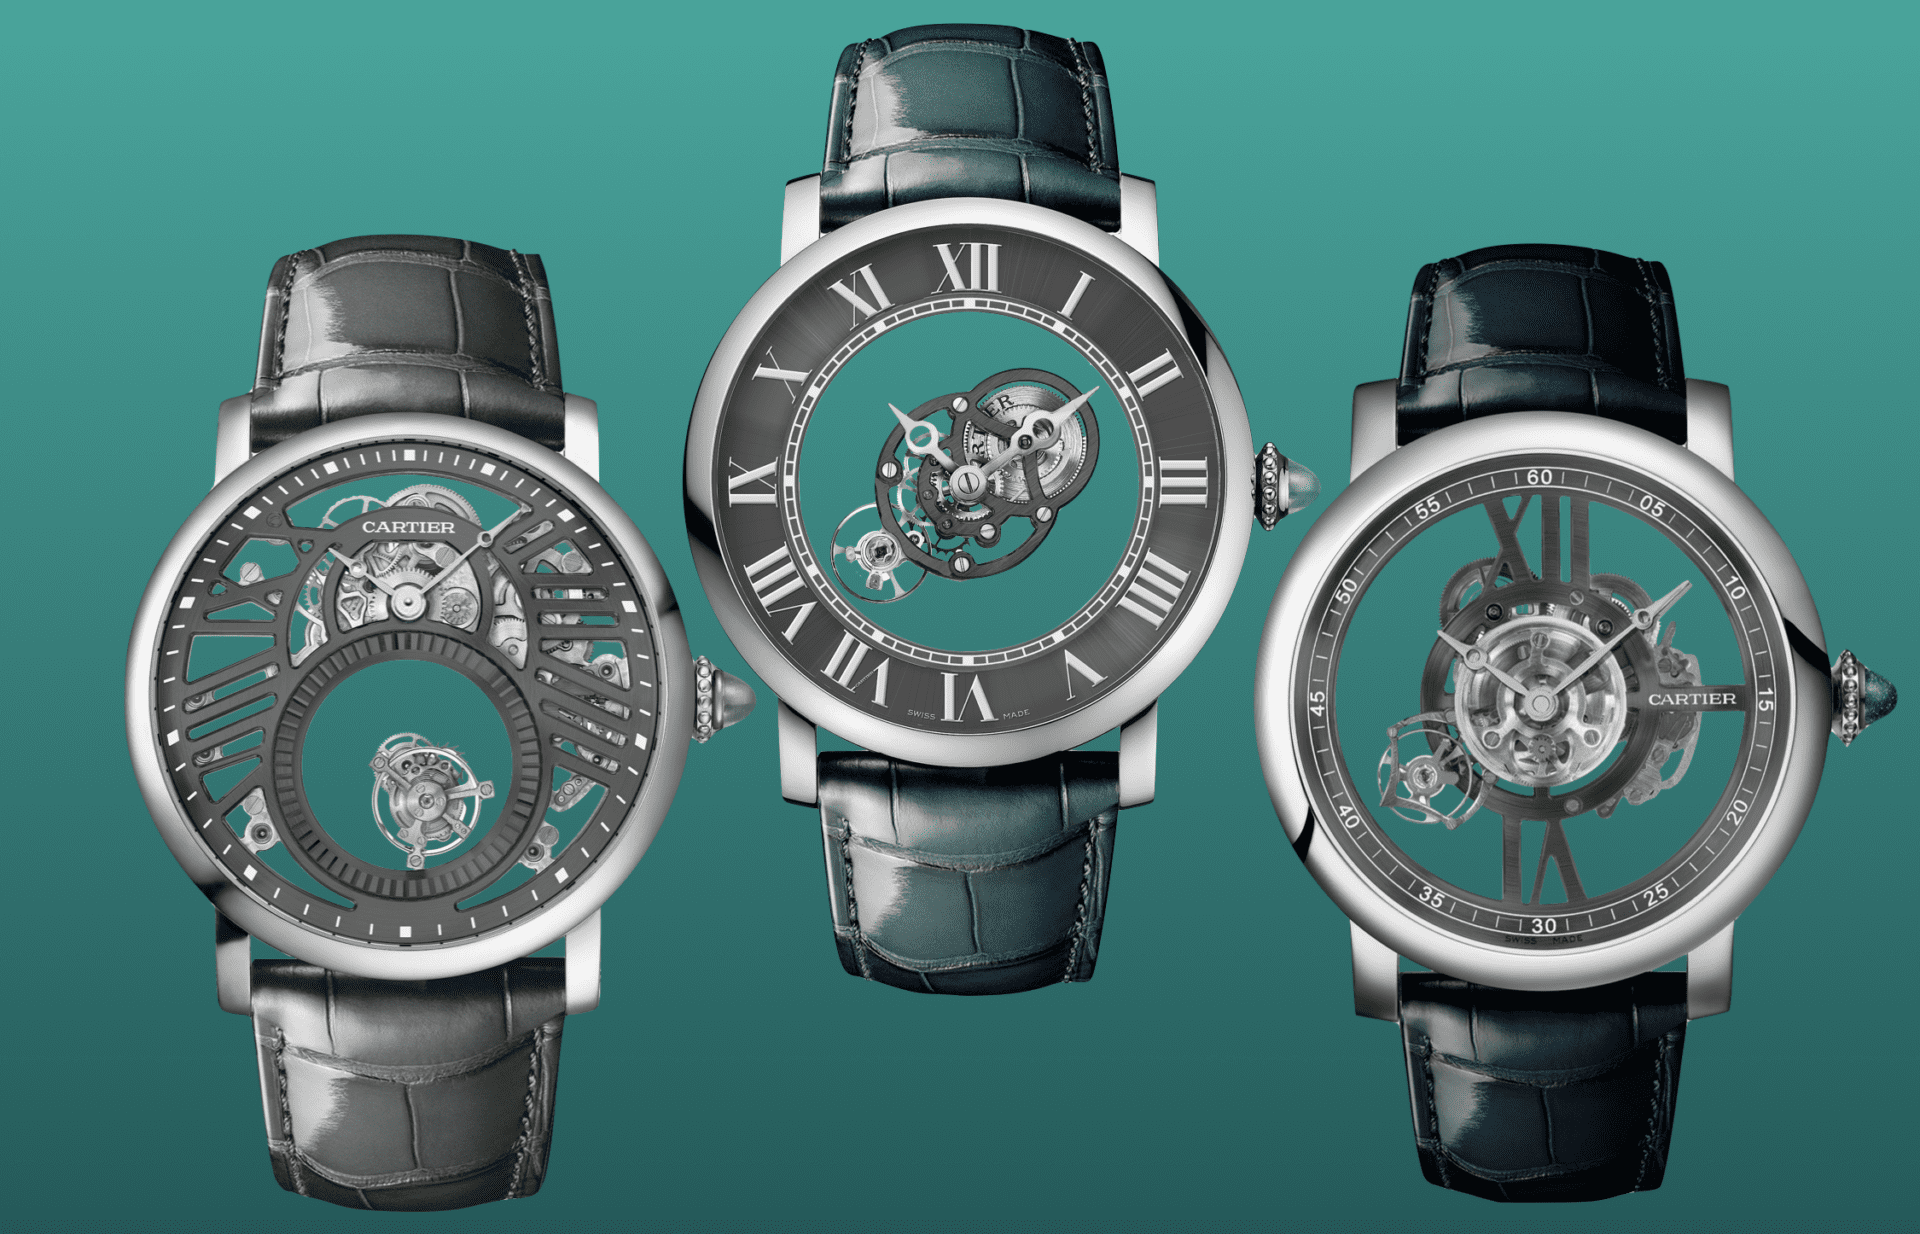 The Cartier Fine Watchmaking collection 